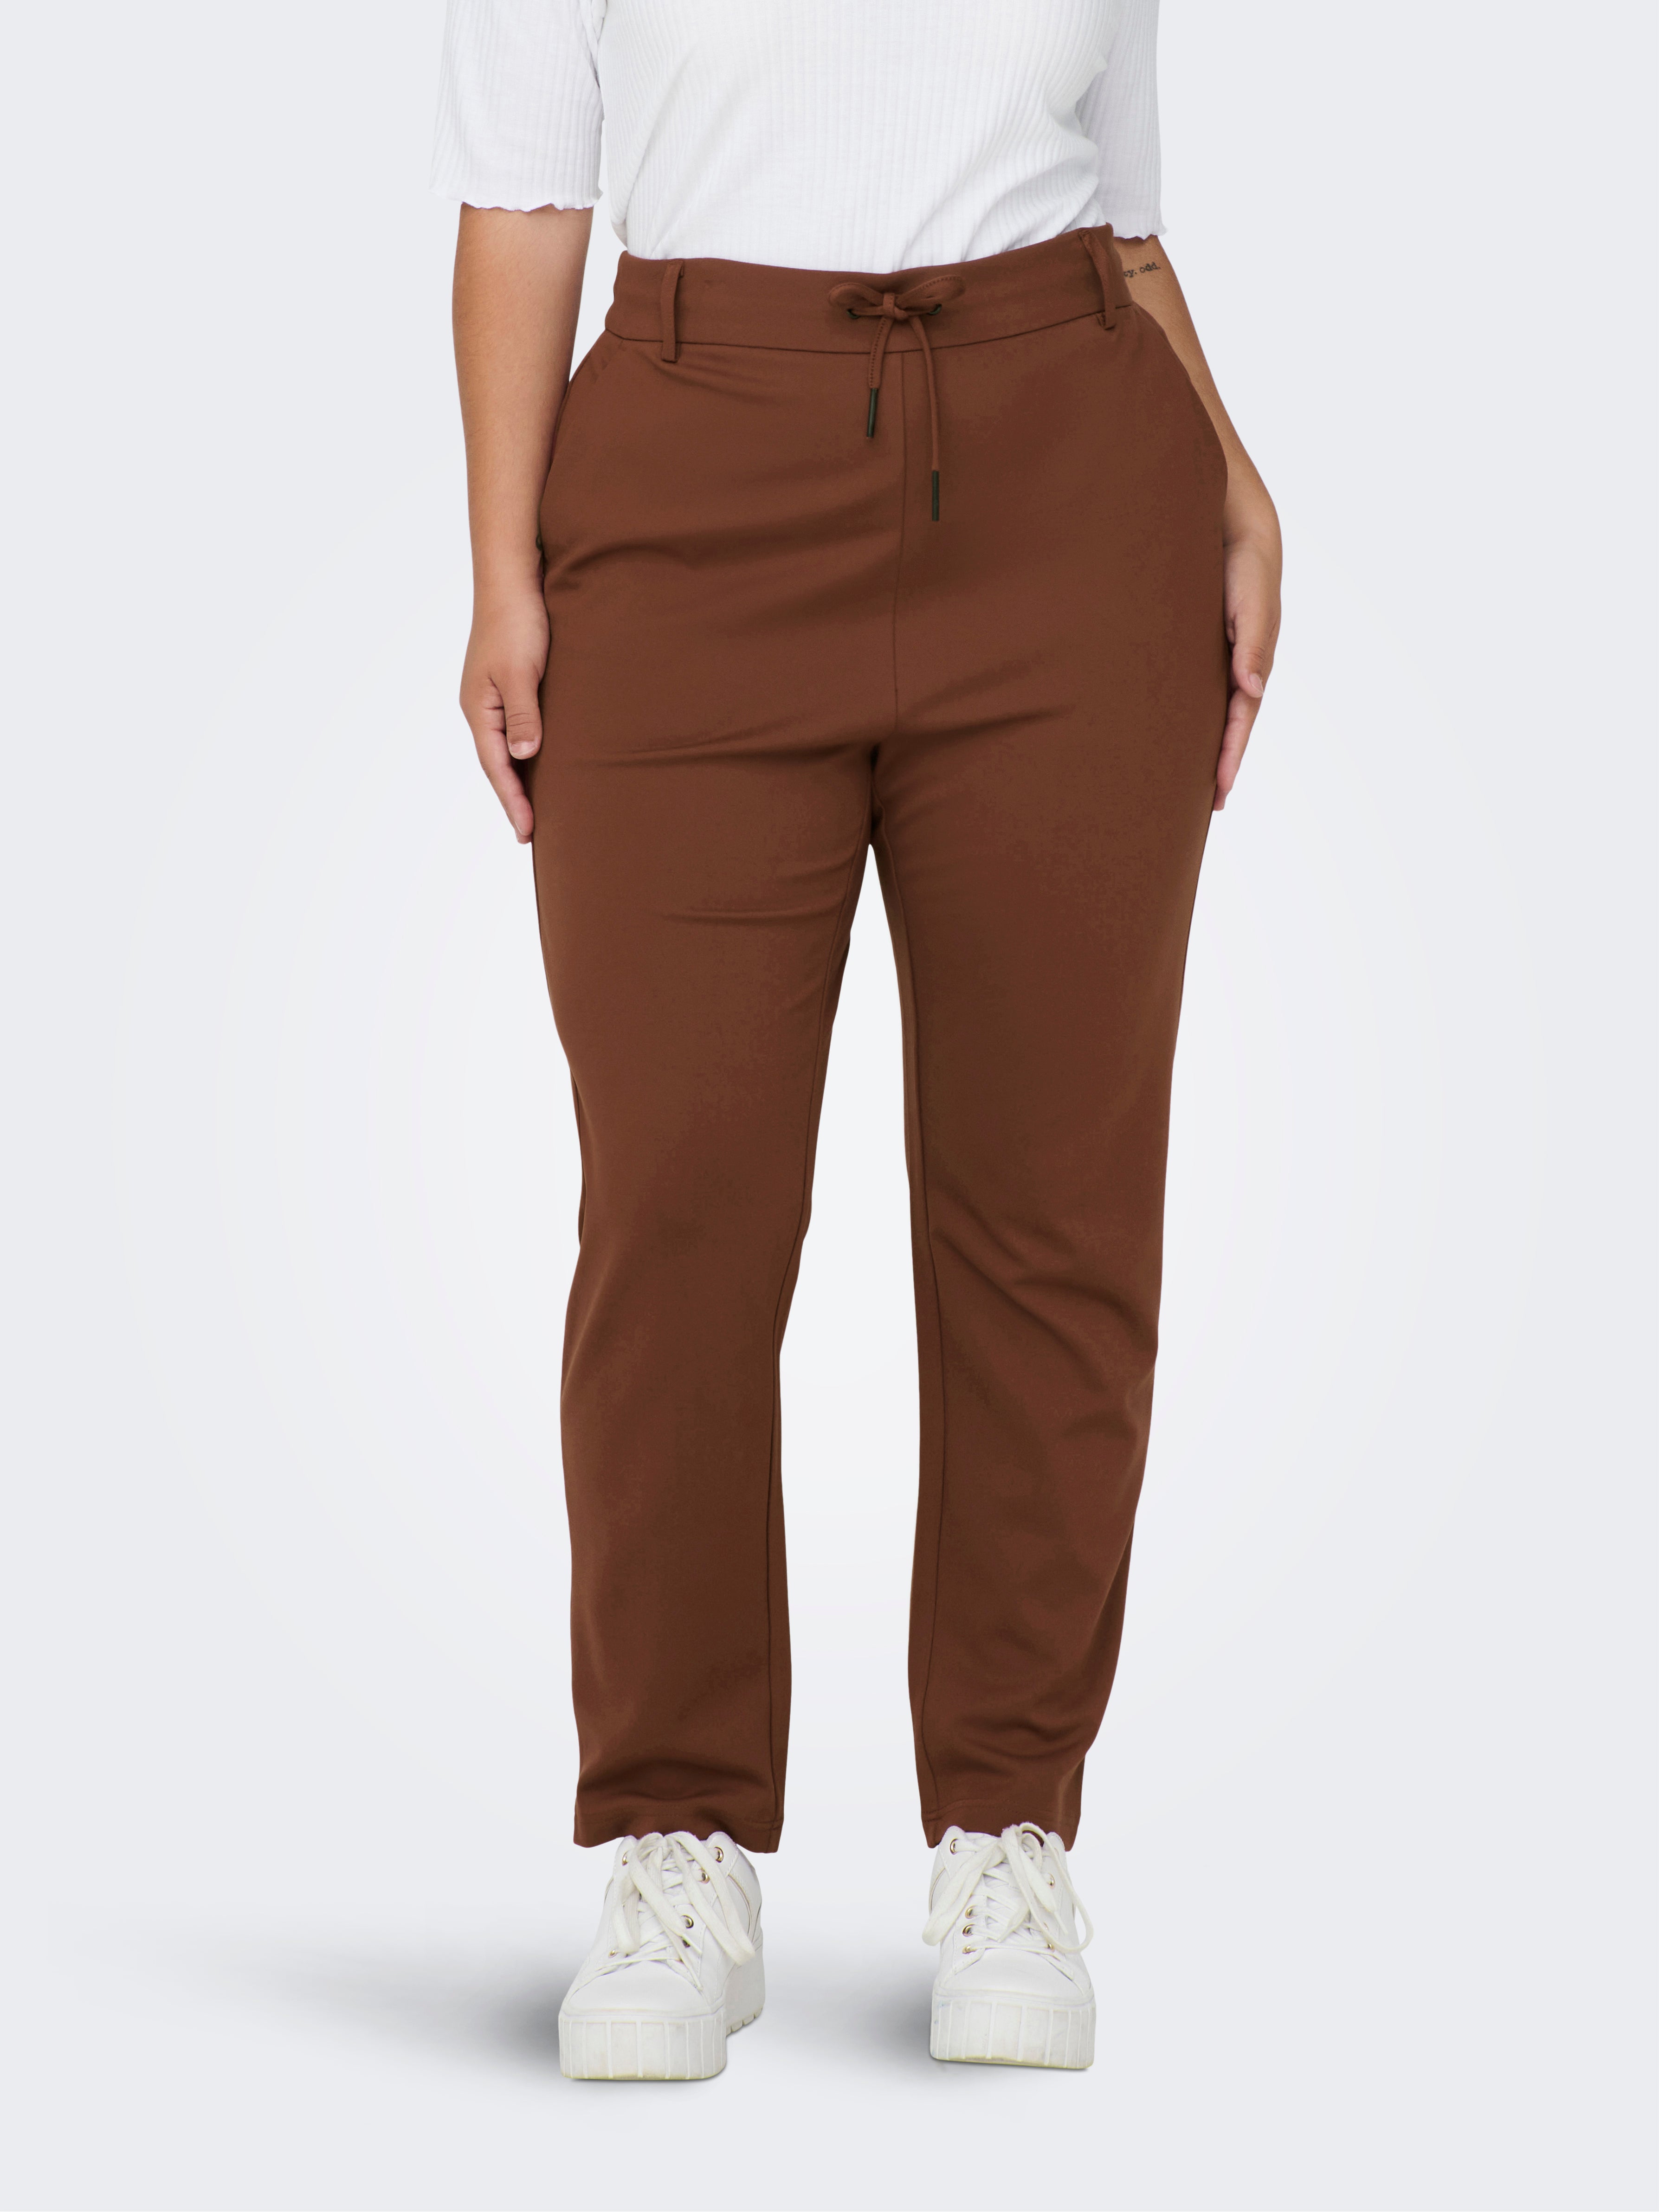 Outlet Wholesale Womens Trouser Models And Price  Gizia Wholesale